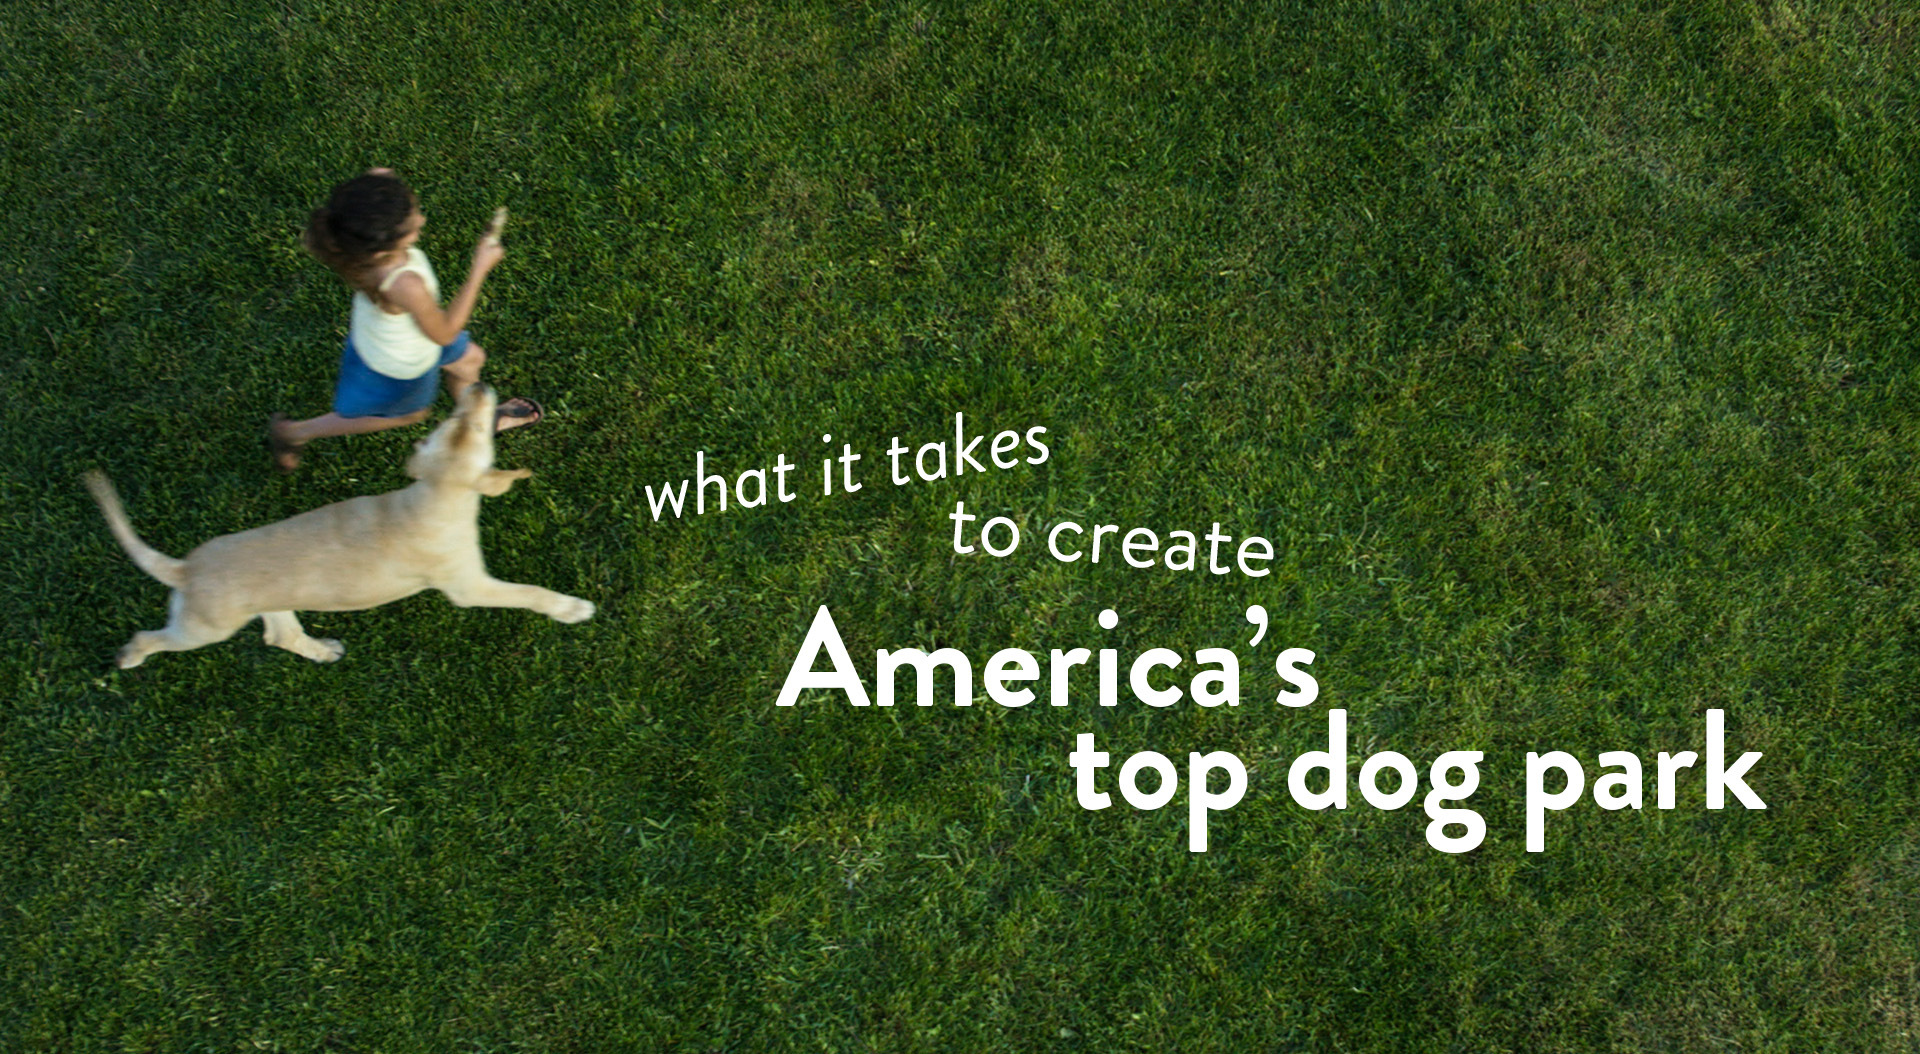 dog on grass with text what it takes to create America's top dog park